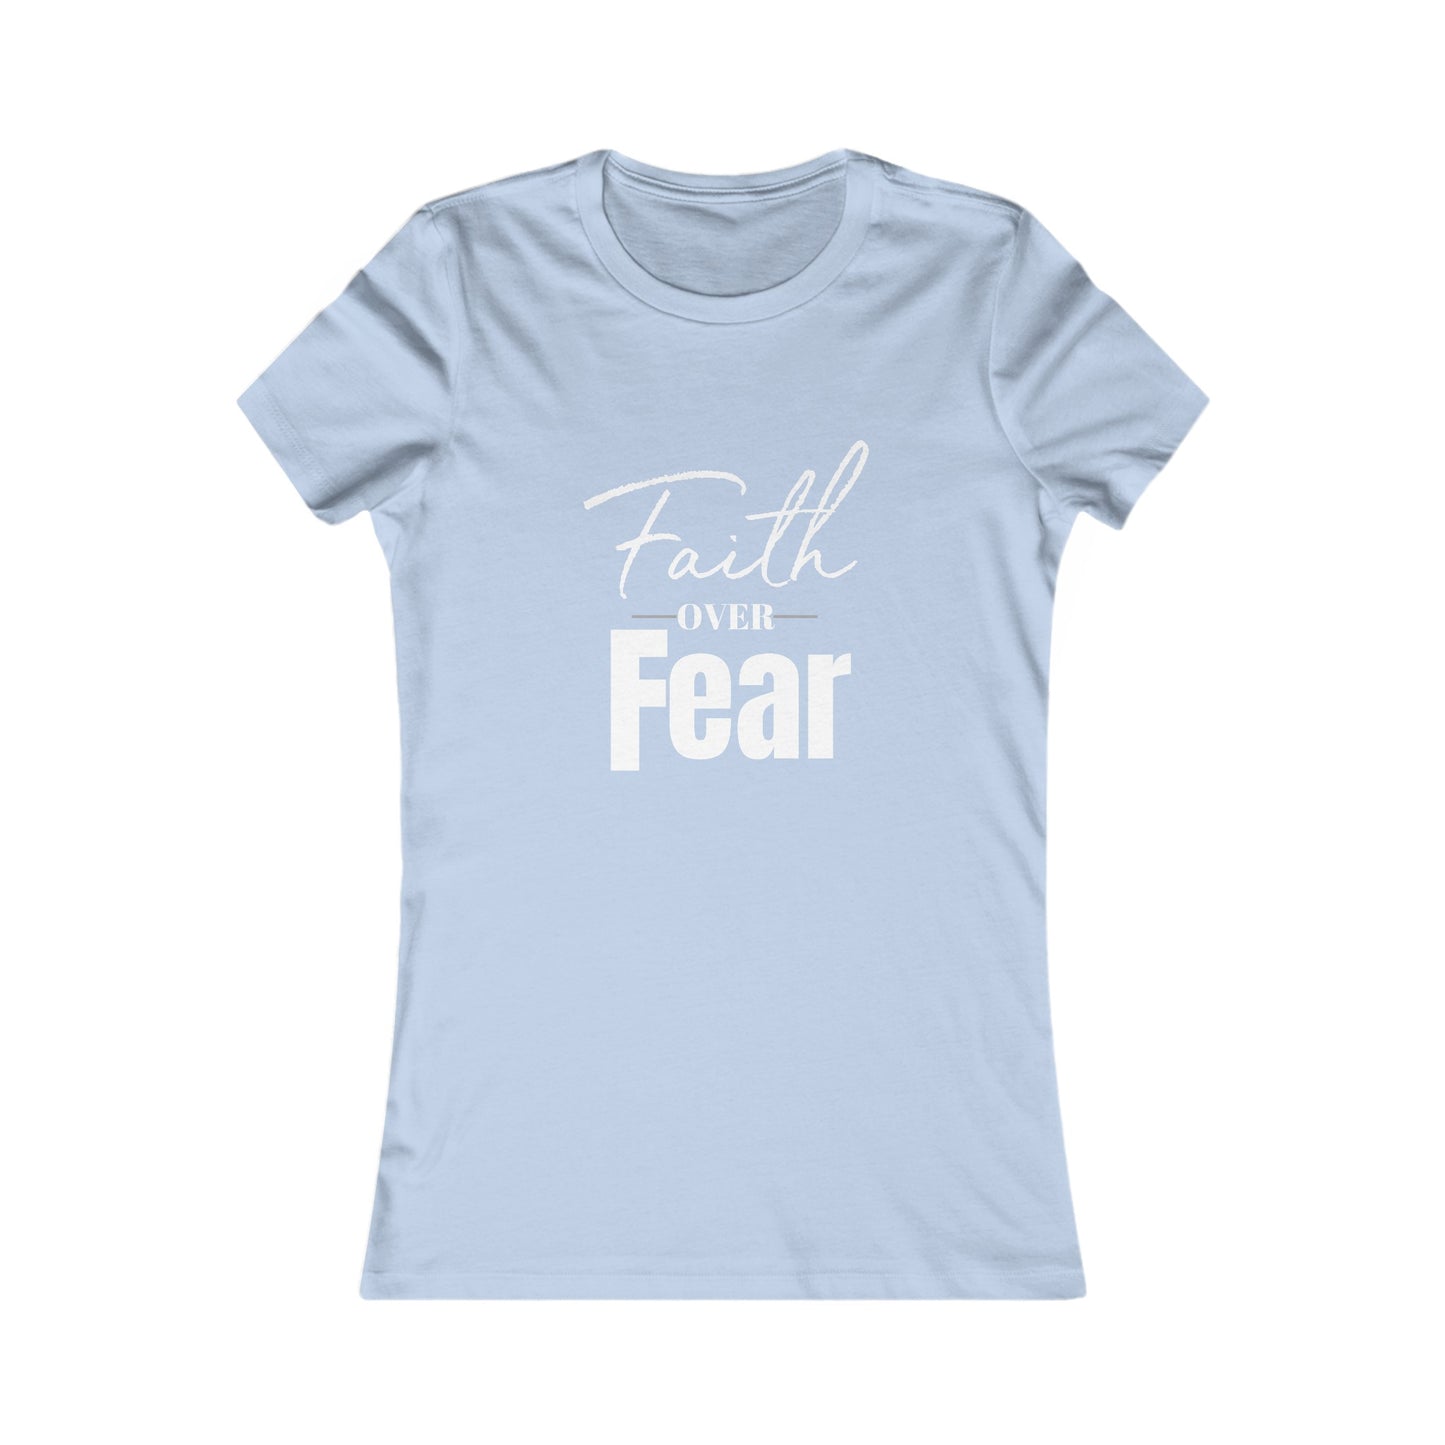 Faith Over Fear Women's Fitted Tshirt (White and Gray Logo)